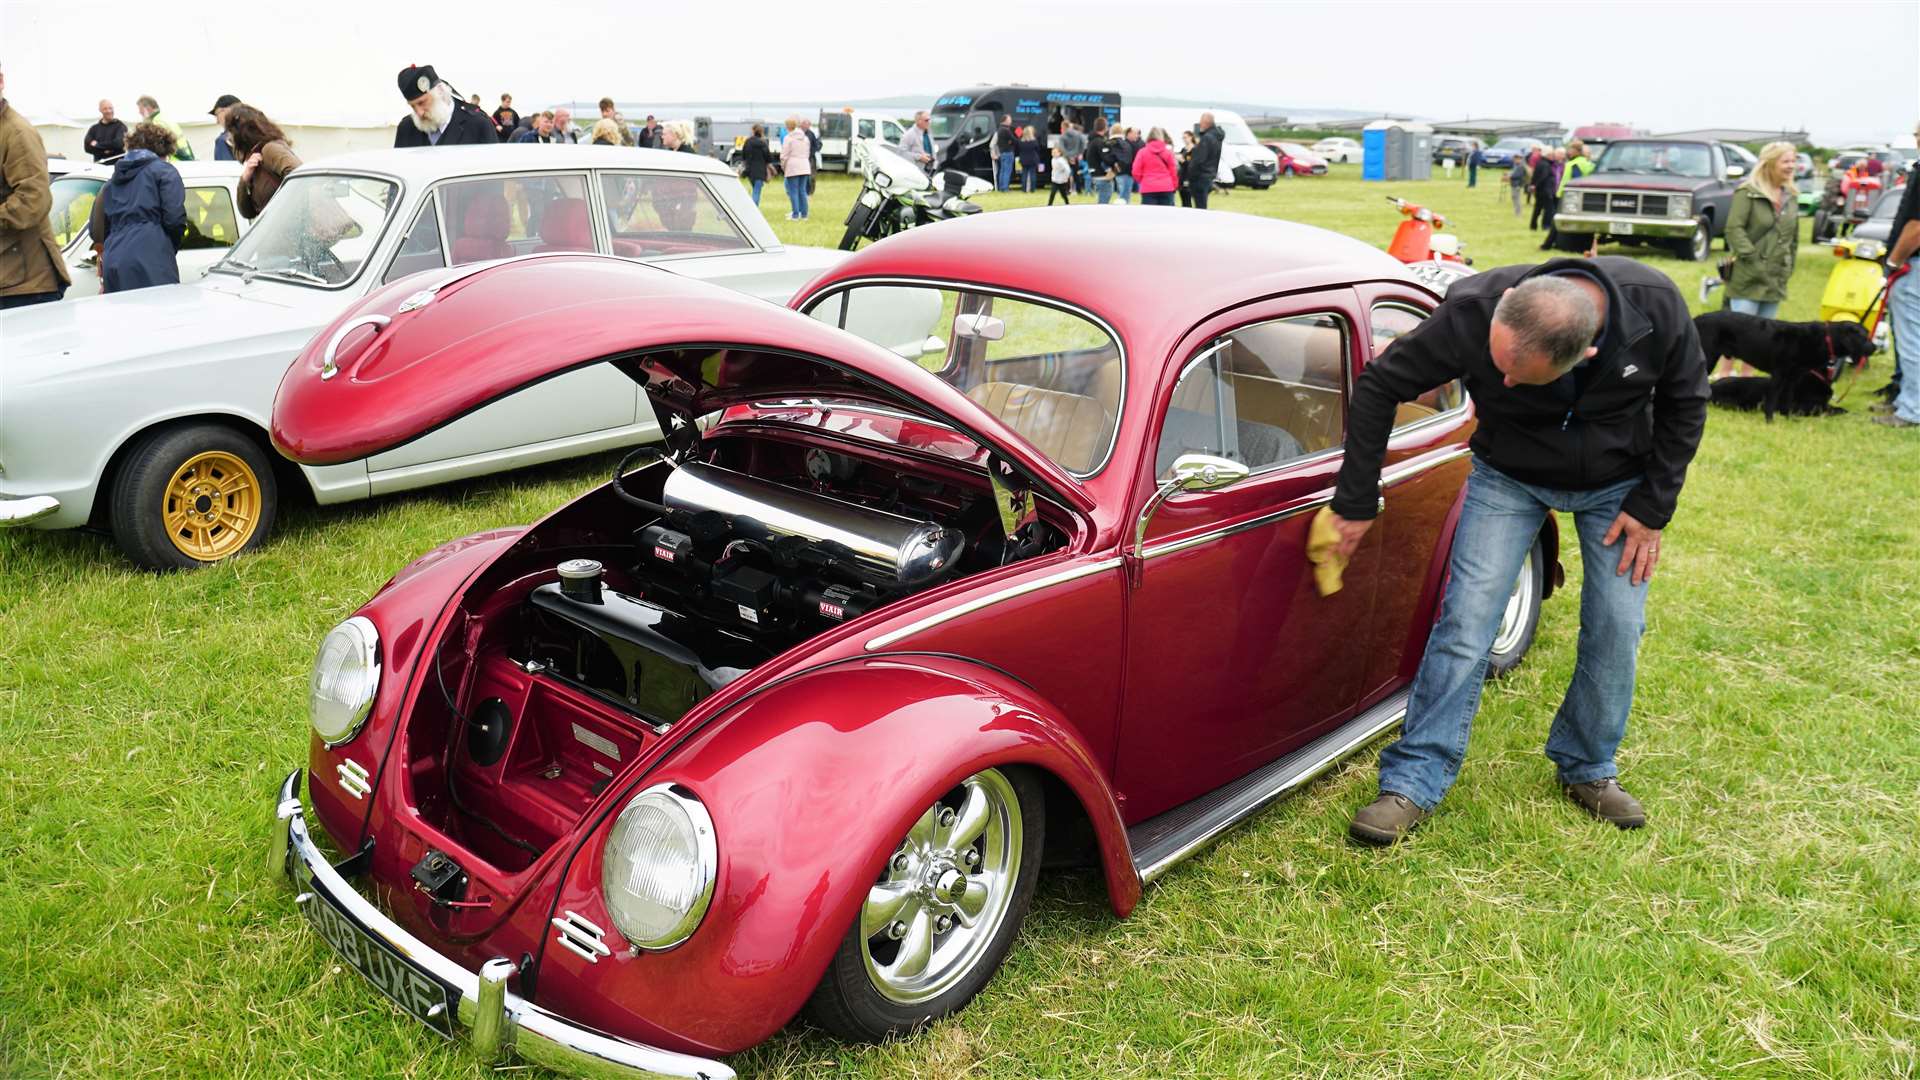 Justin Kirby polishes his custom Volkswagen that has a digitally controlled suspension system. Picture: DGS